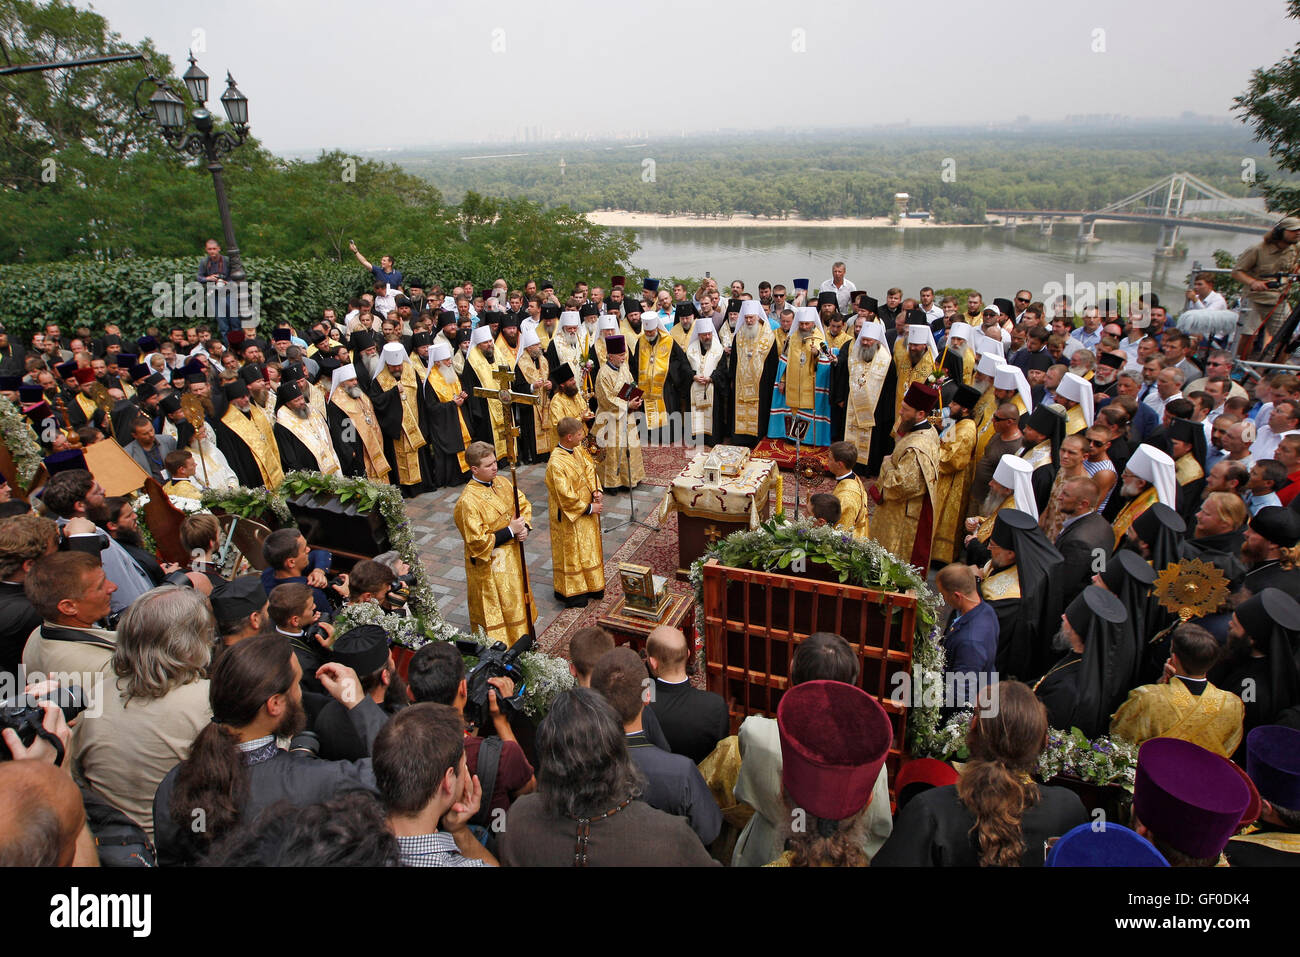 The Head of the Ukrainian Orthodox Church of the Moscow Patriarchate Metropolitan Onufry (C) attends a prayer service at the St. Vladimir's Hill in Kiev, on July 27, 2016. Ukrainian believers, priests and nuns of Ukrainian Orthodox Church of Moscow Patriarchy took part in a procession of the cross to mark the anniversary of the Baptism of Kievan Rus in Kiev. But supporters of the Ukrainian Orthodox Church of Kiev Patriarchy believe that the procession of the cross is organized by pro-Russian powers to destabilize the political situation in the country (Photo by Vasyl Shevchenko/ Pacific Press) Stock Photo